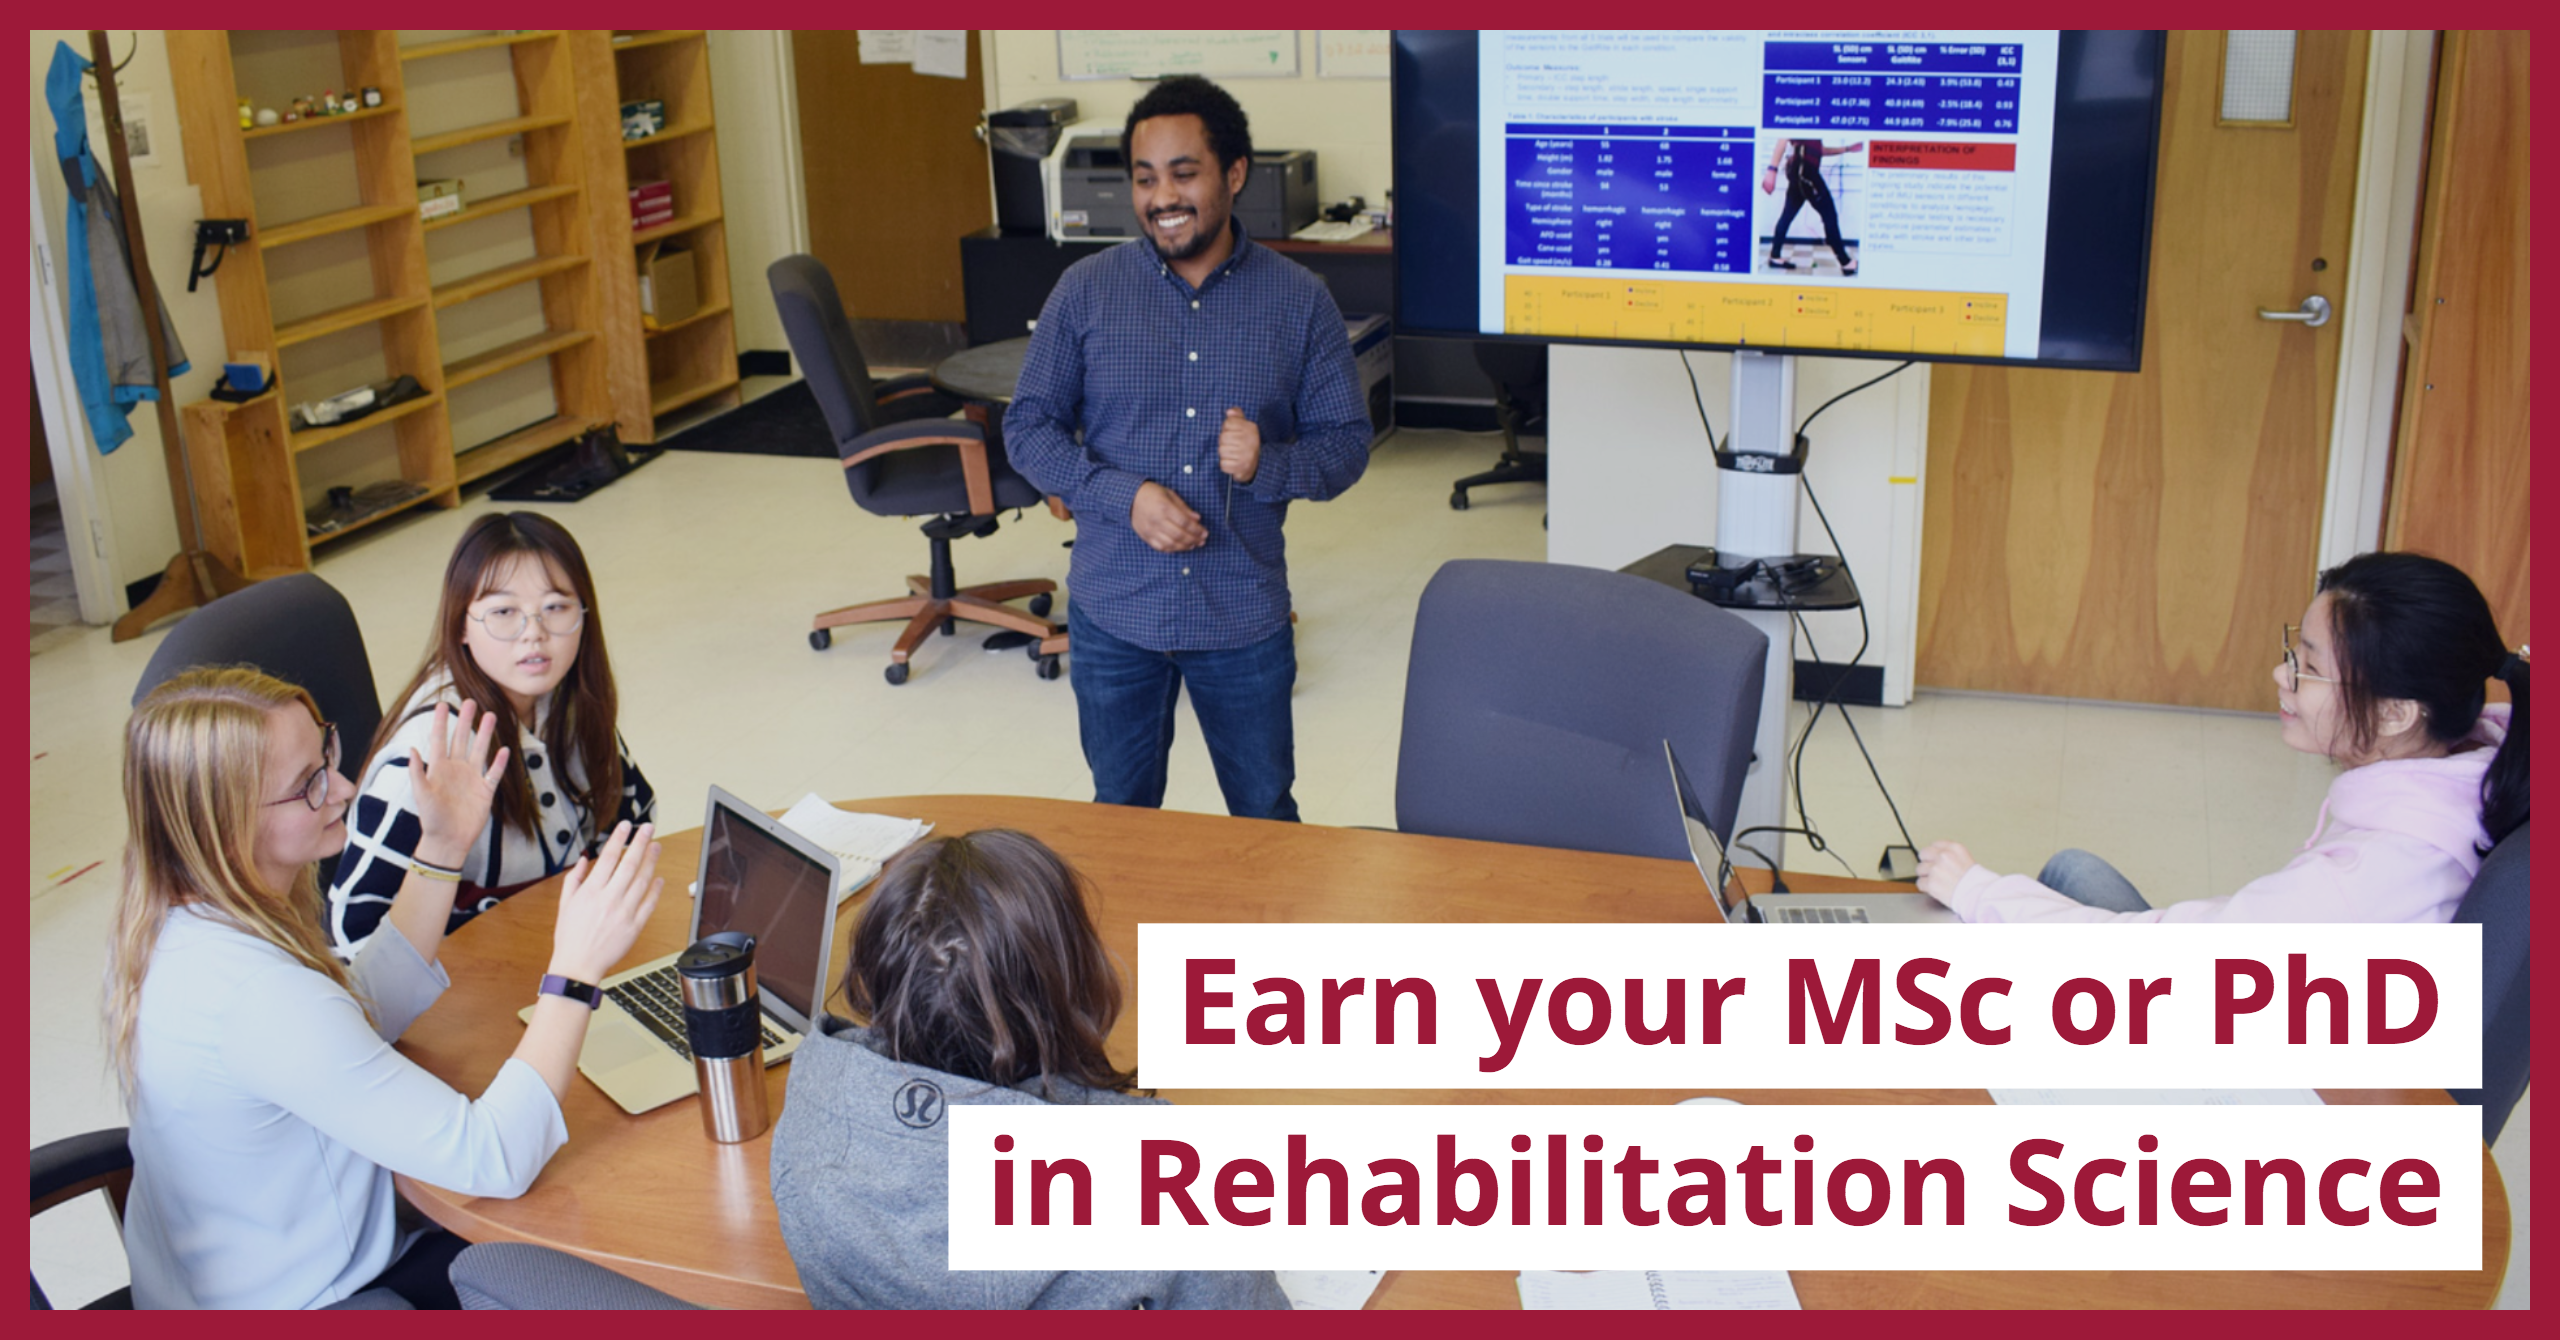 Rehabilitation Science Online Information Sessions